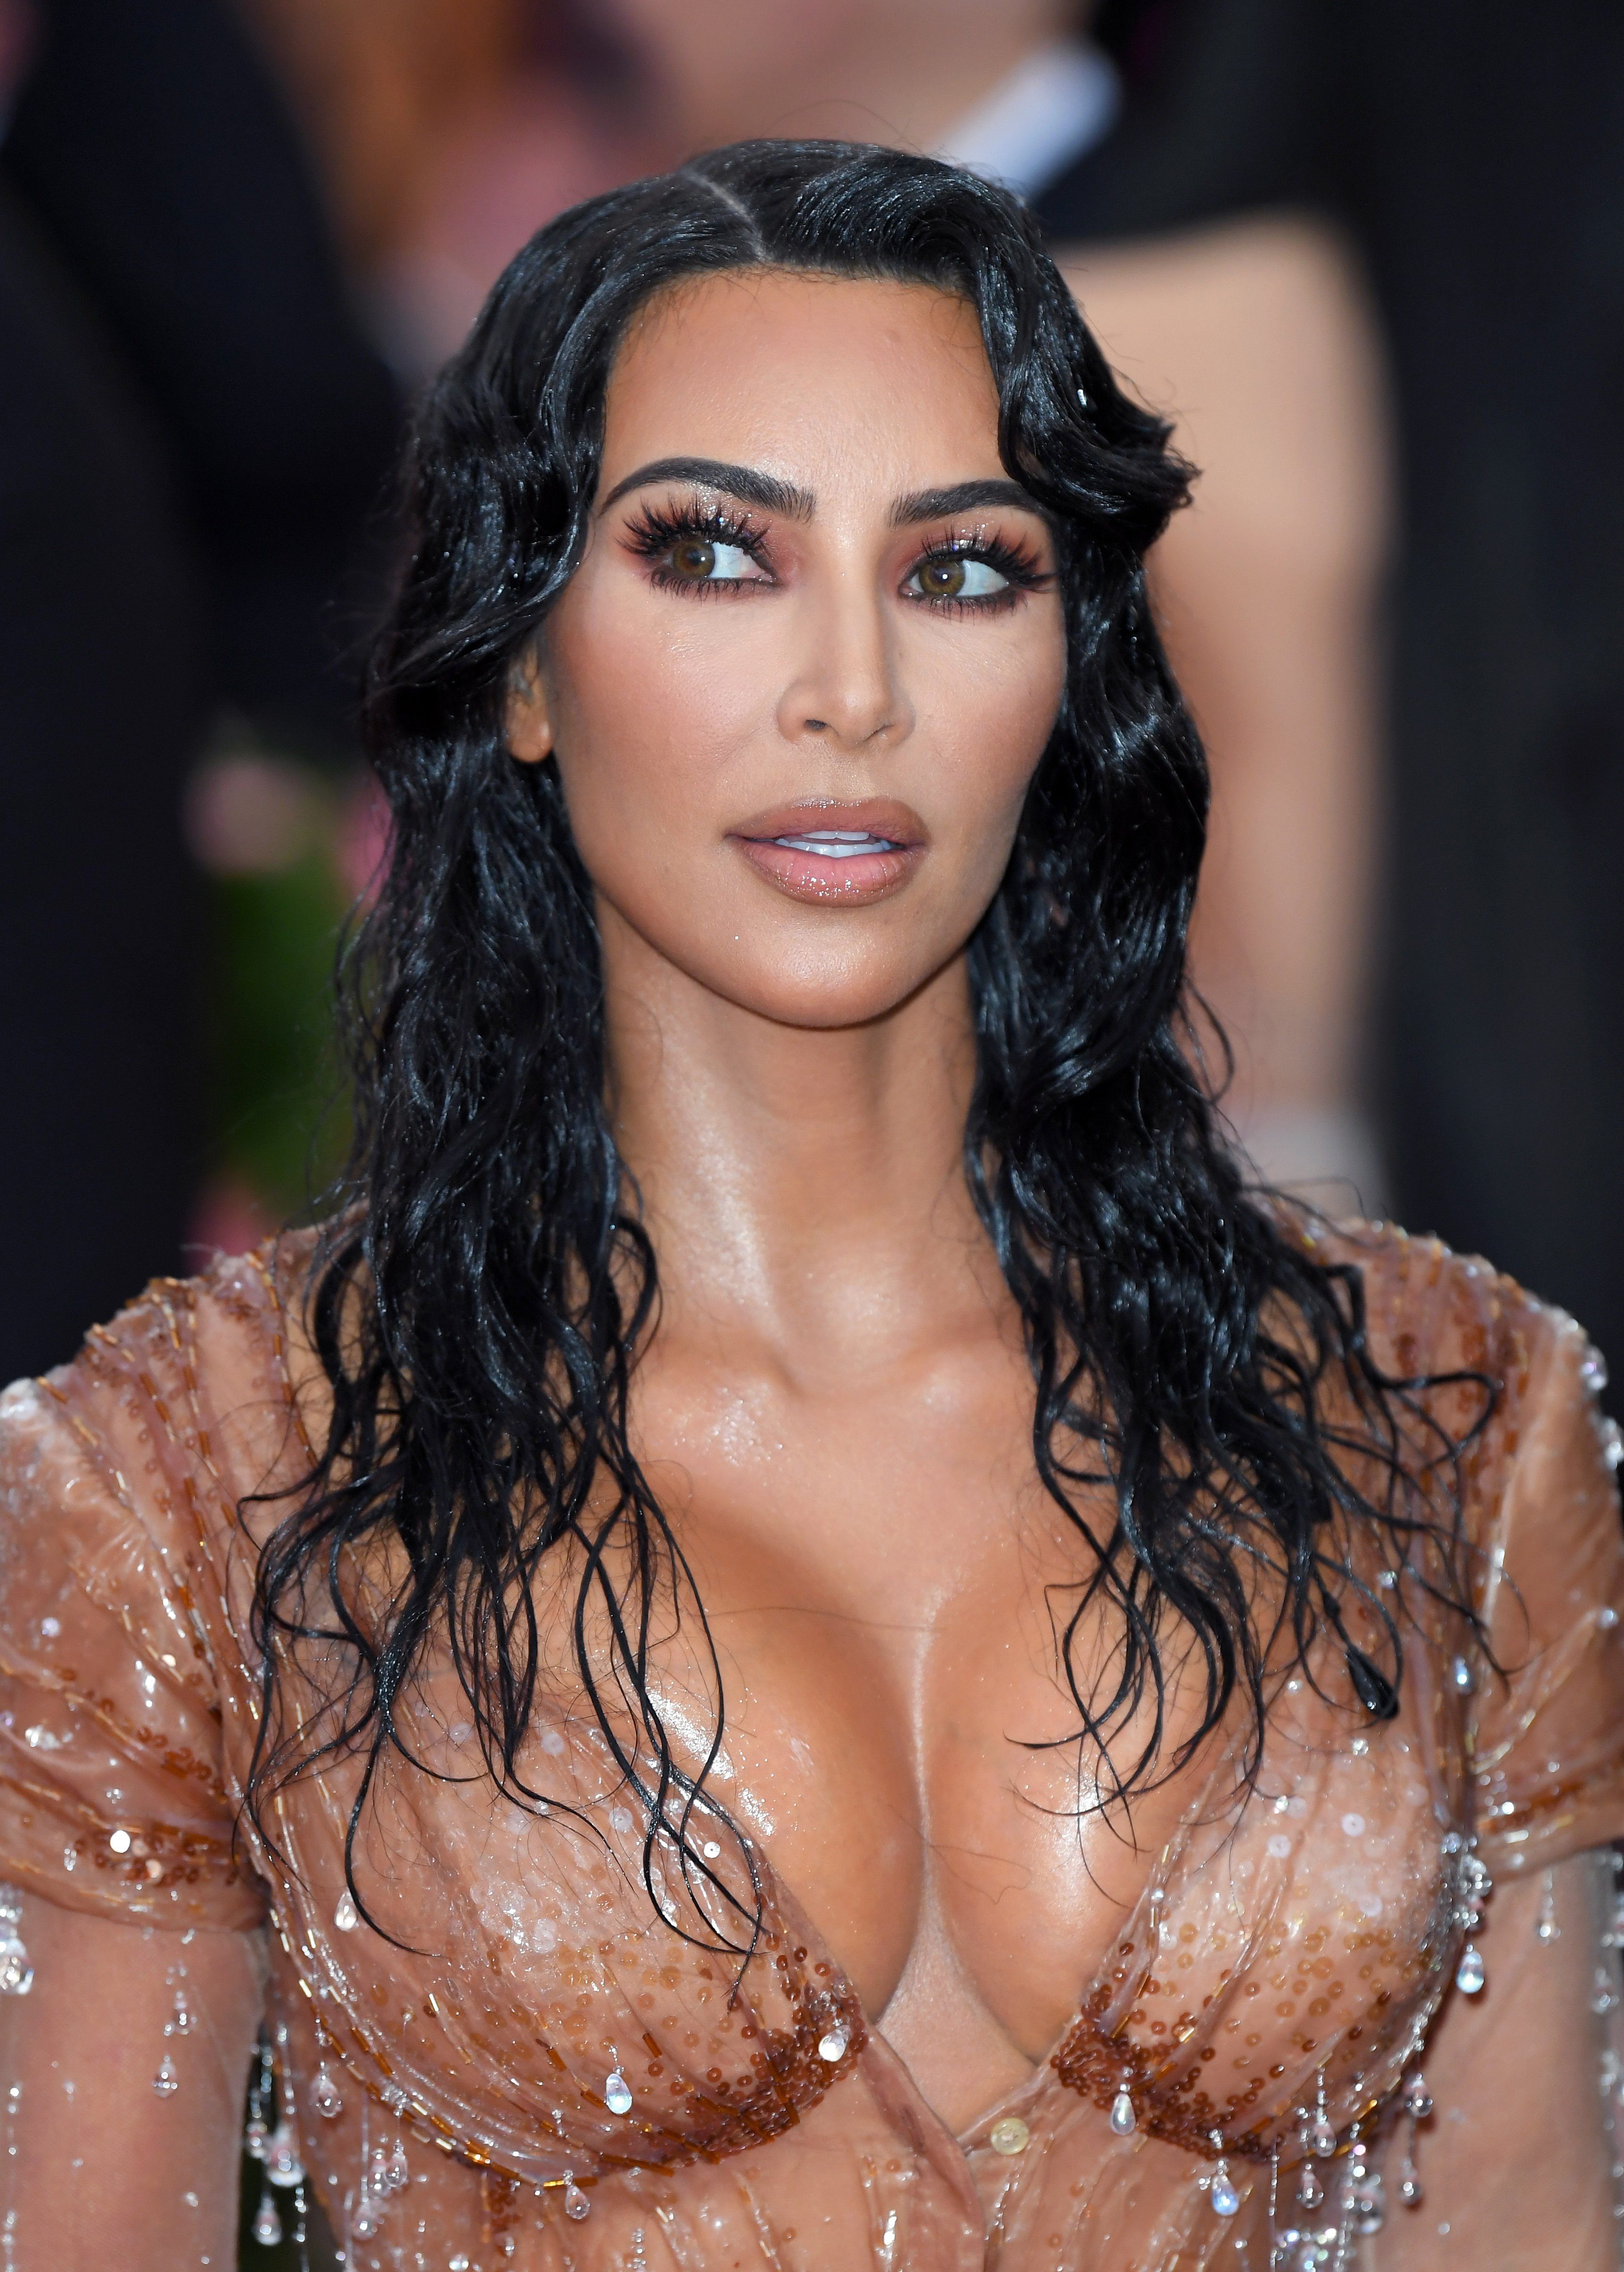 Kim Kardashian West at the 2019 Met Gala at the Metropolitan Museum of Art on May 06, 2019 in New York City.| Source: Getty Images